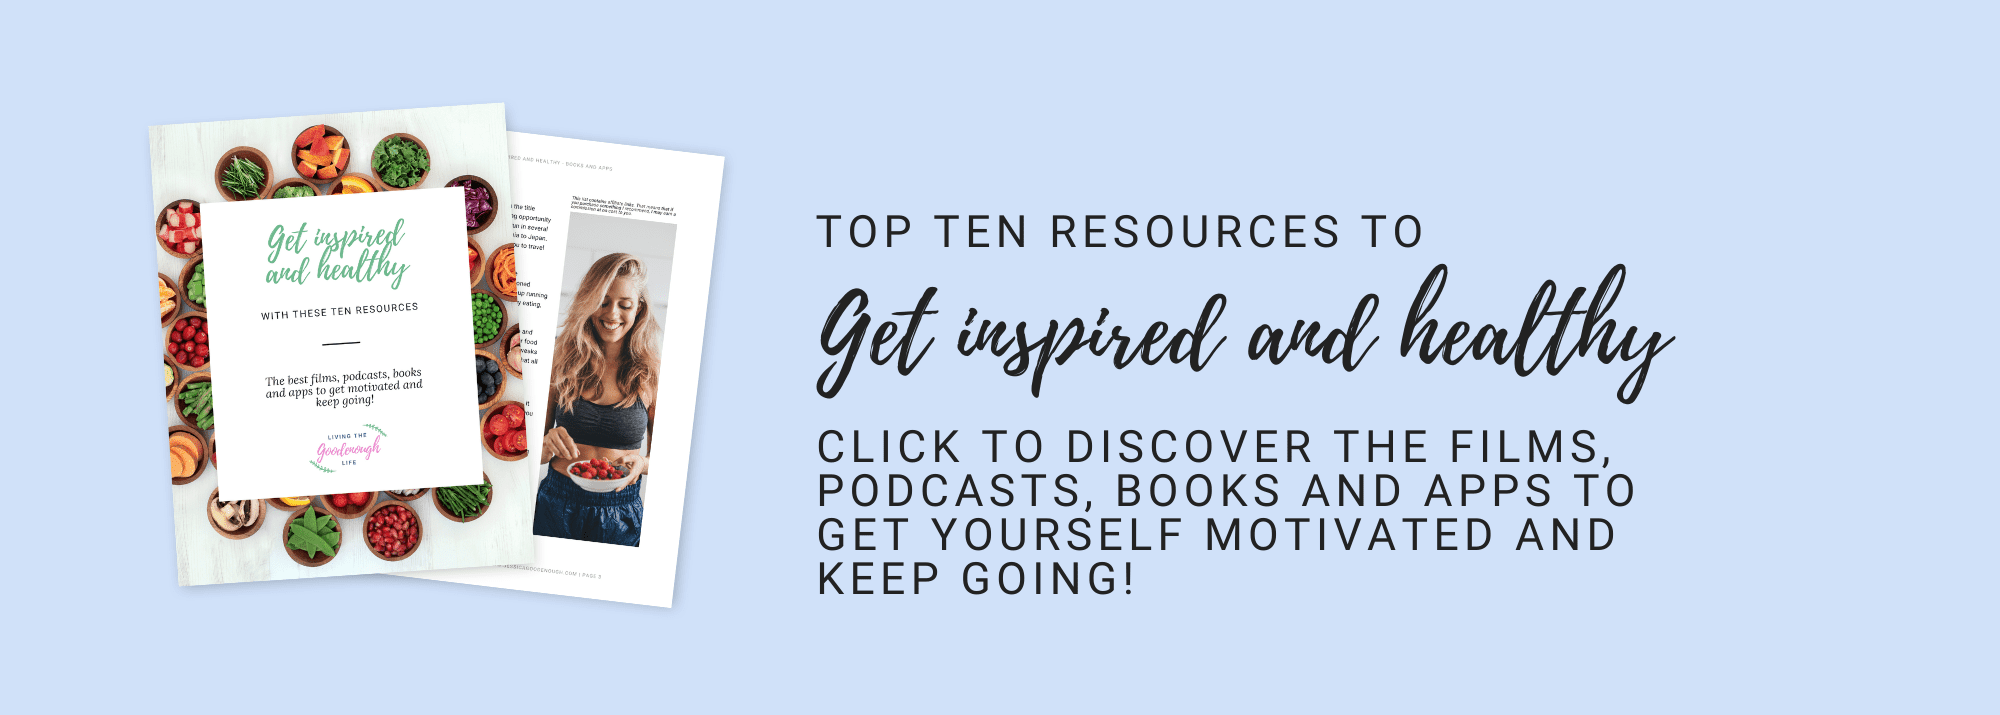 Receive my top ten health and fitness resources: two films, two podcasts, three books and three apps. I challenge you not to be inspired into action!